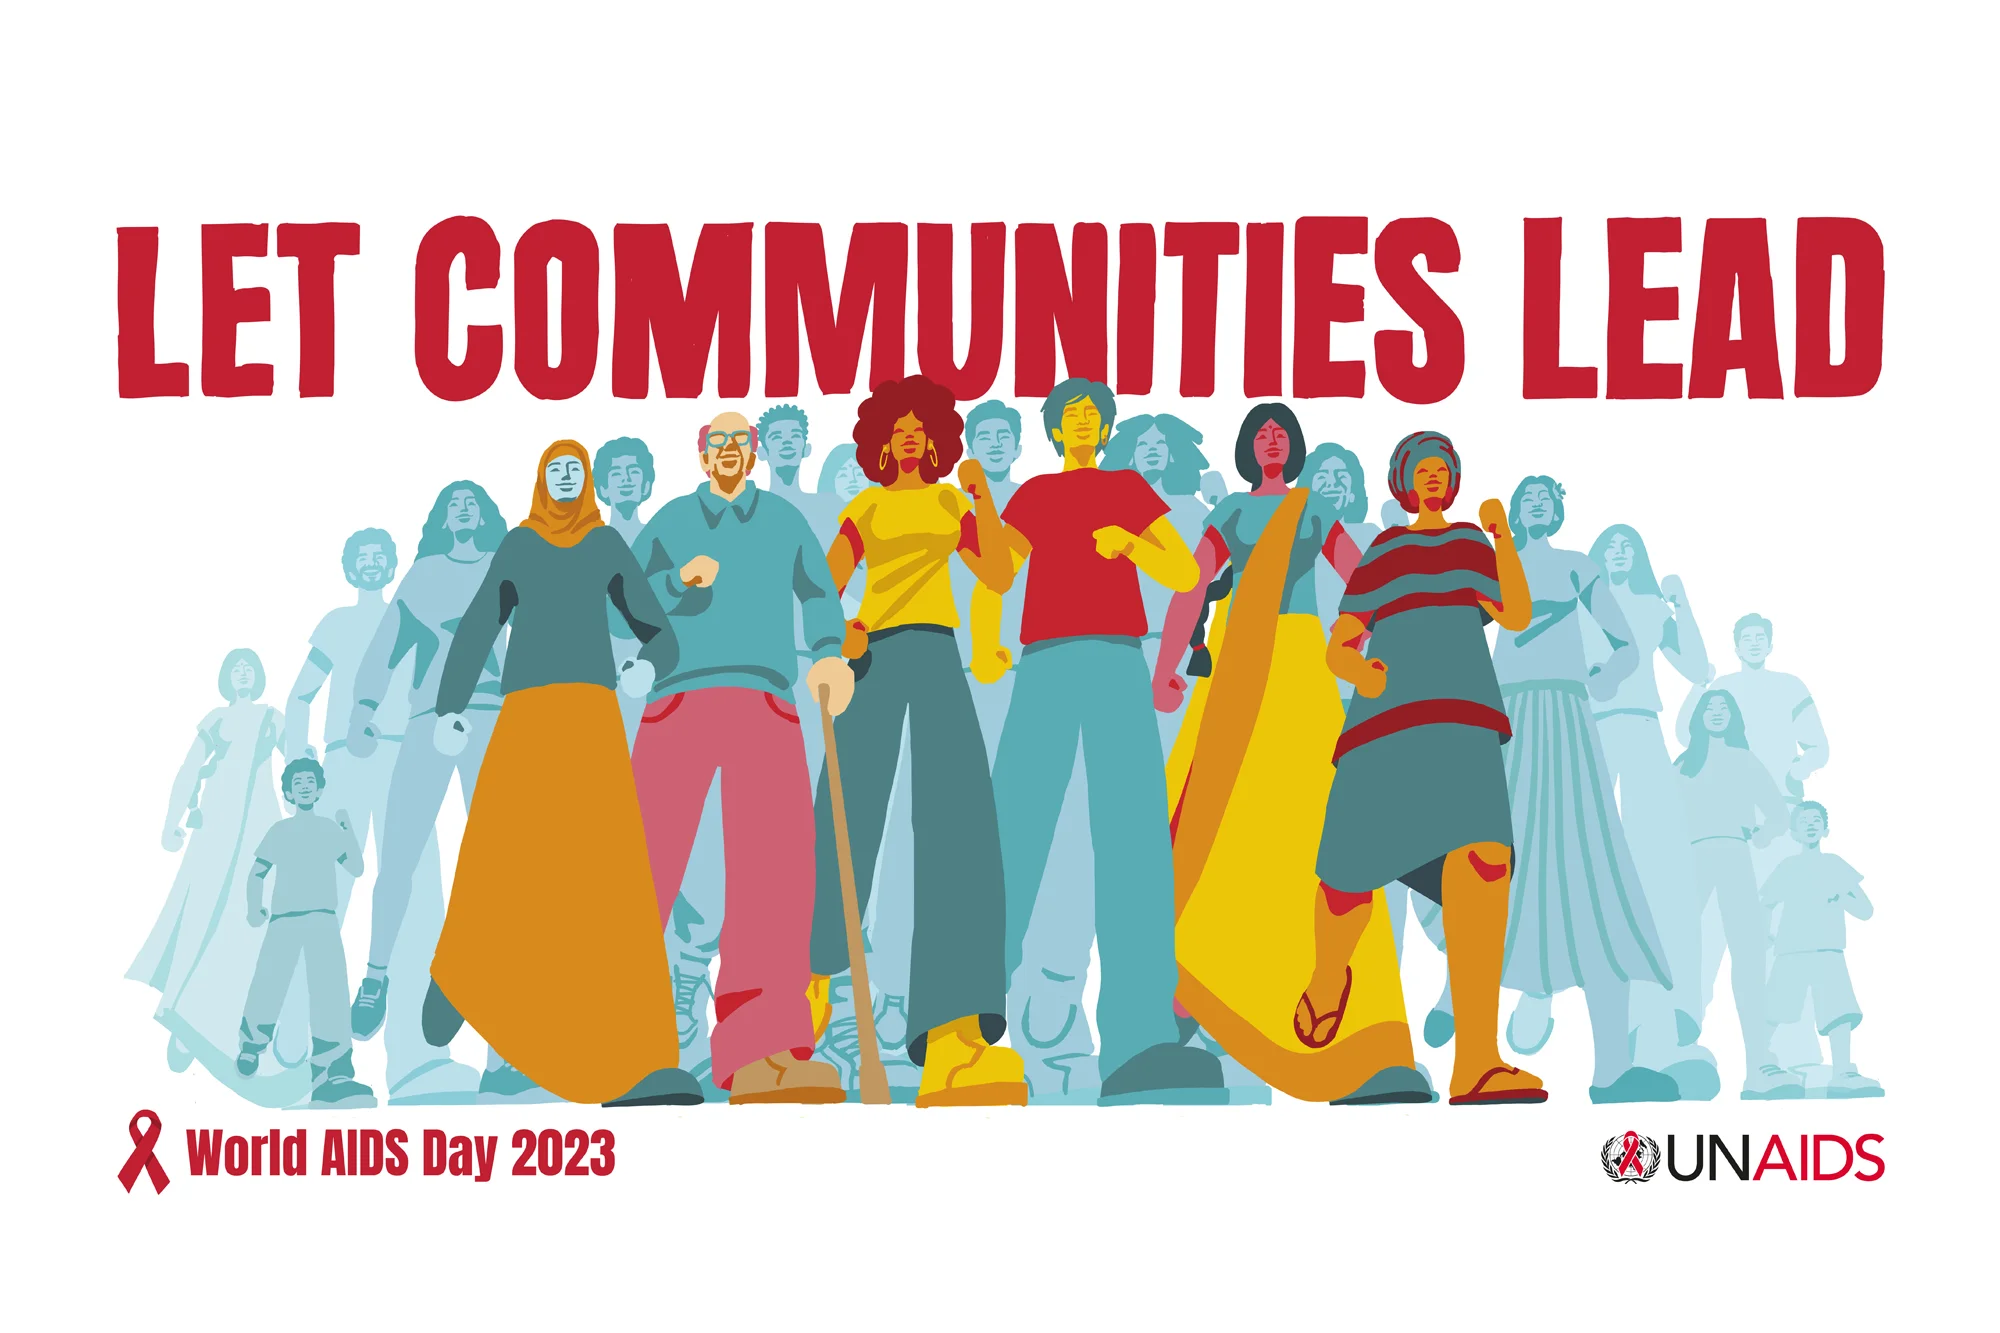 World AIDS Day 2023 Theme - LET COMMUNITIES LEAD